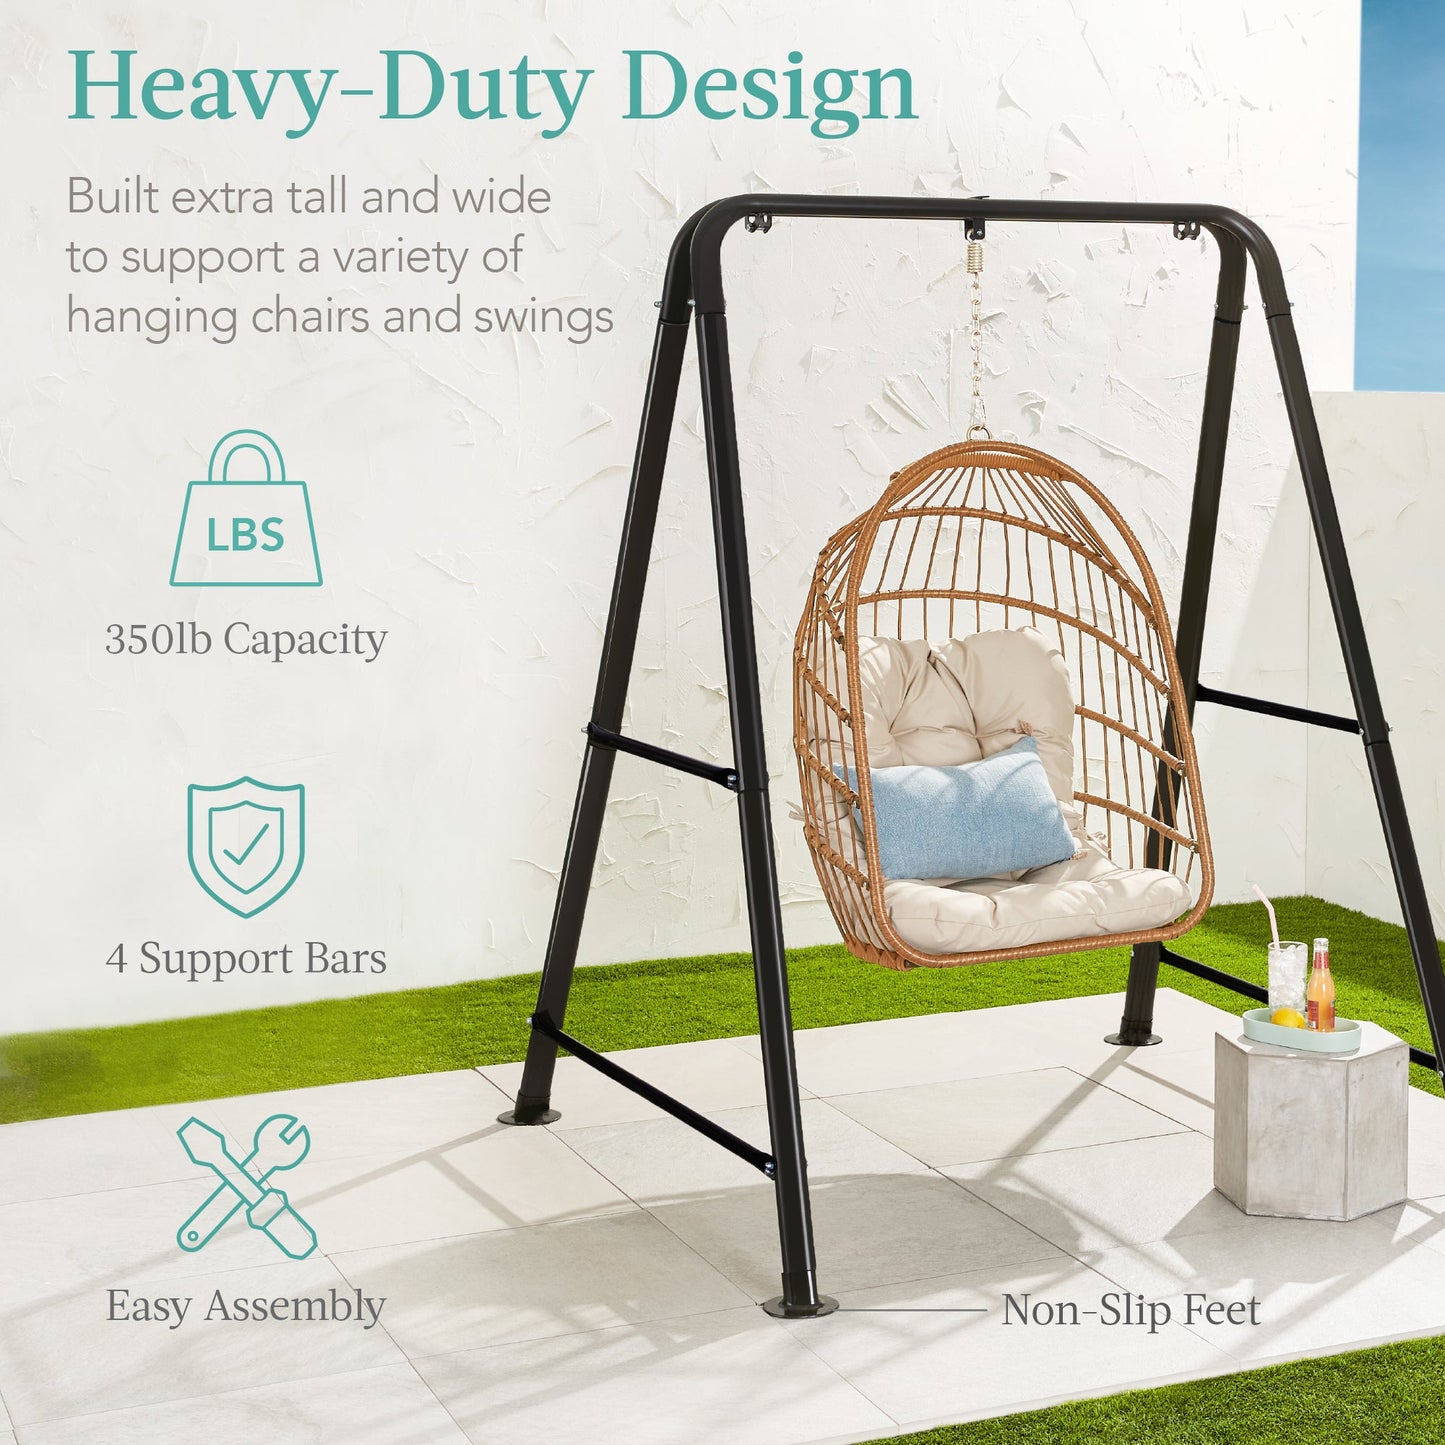 Heavy Duty Hammock Chair Stand w/ Hanging Hardware, 47in Chain - 75in